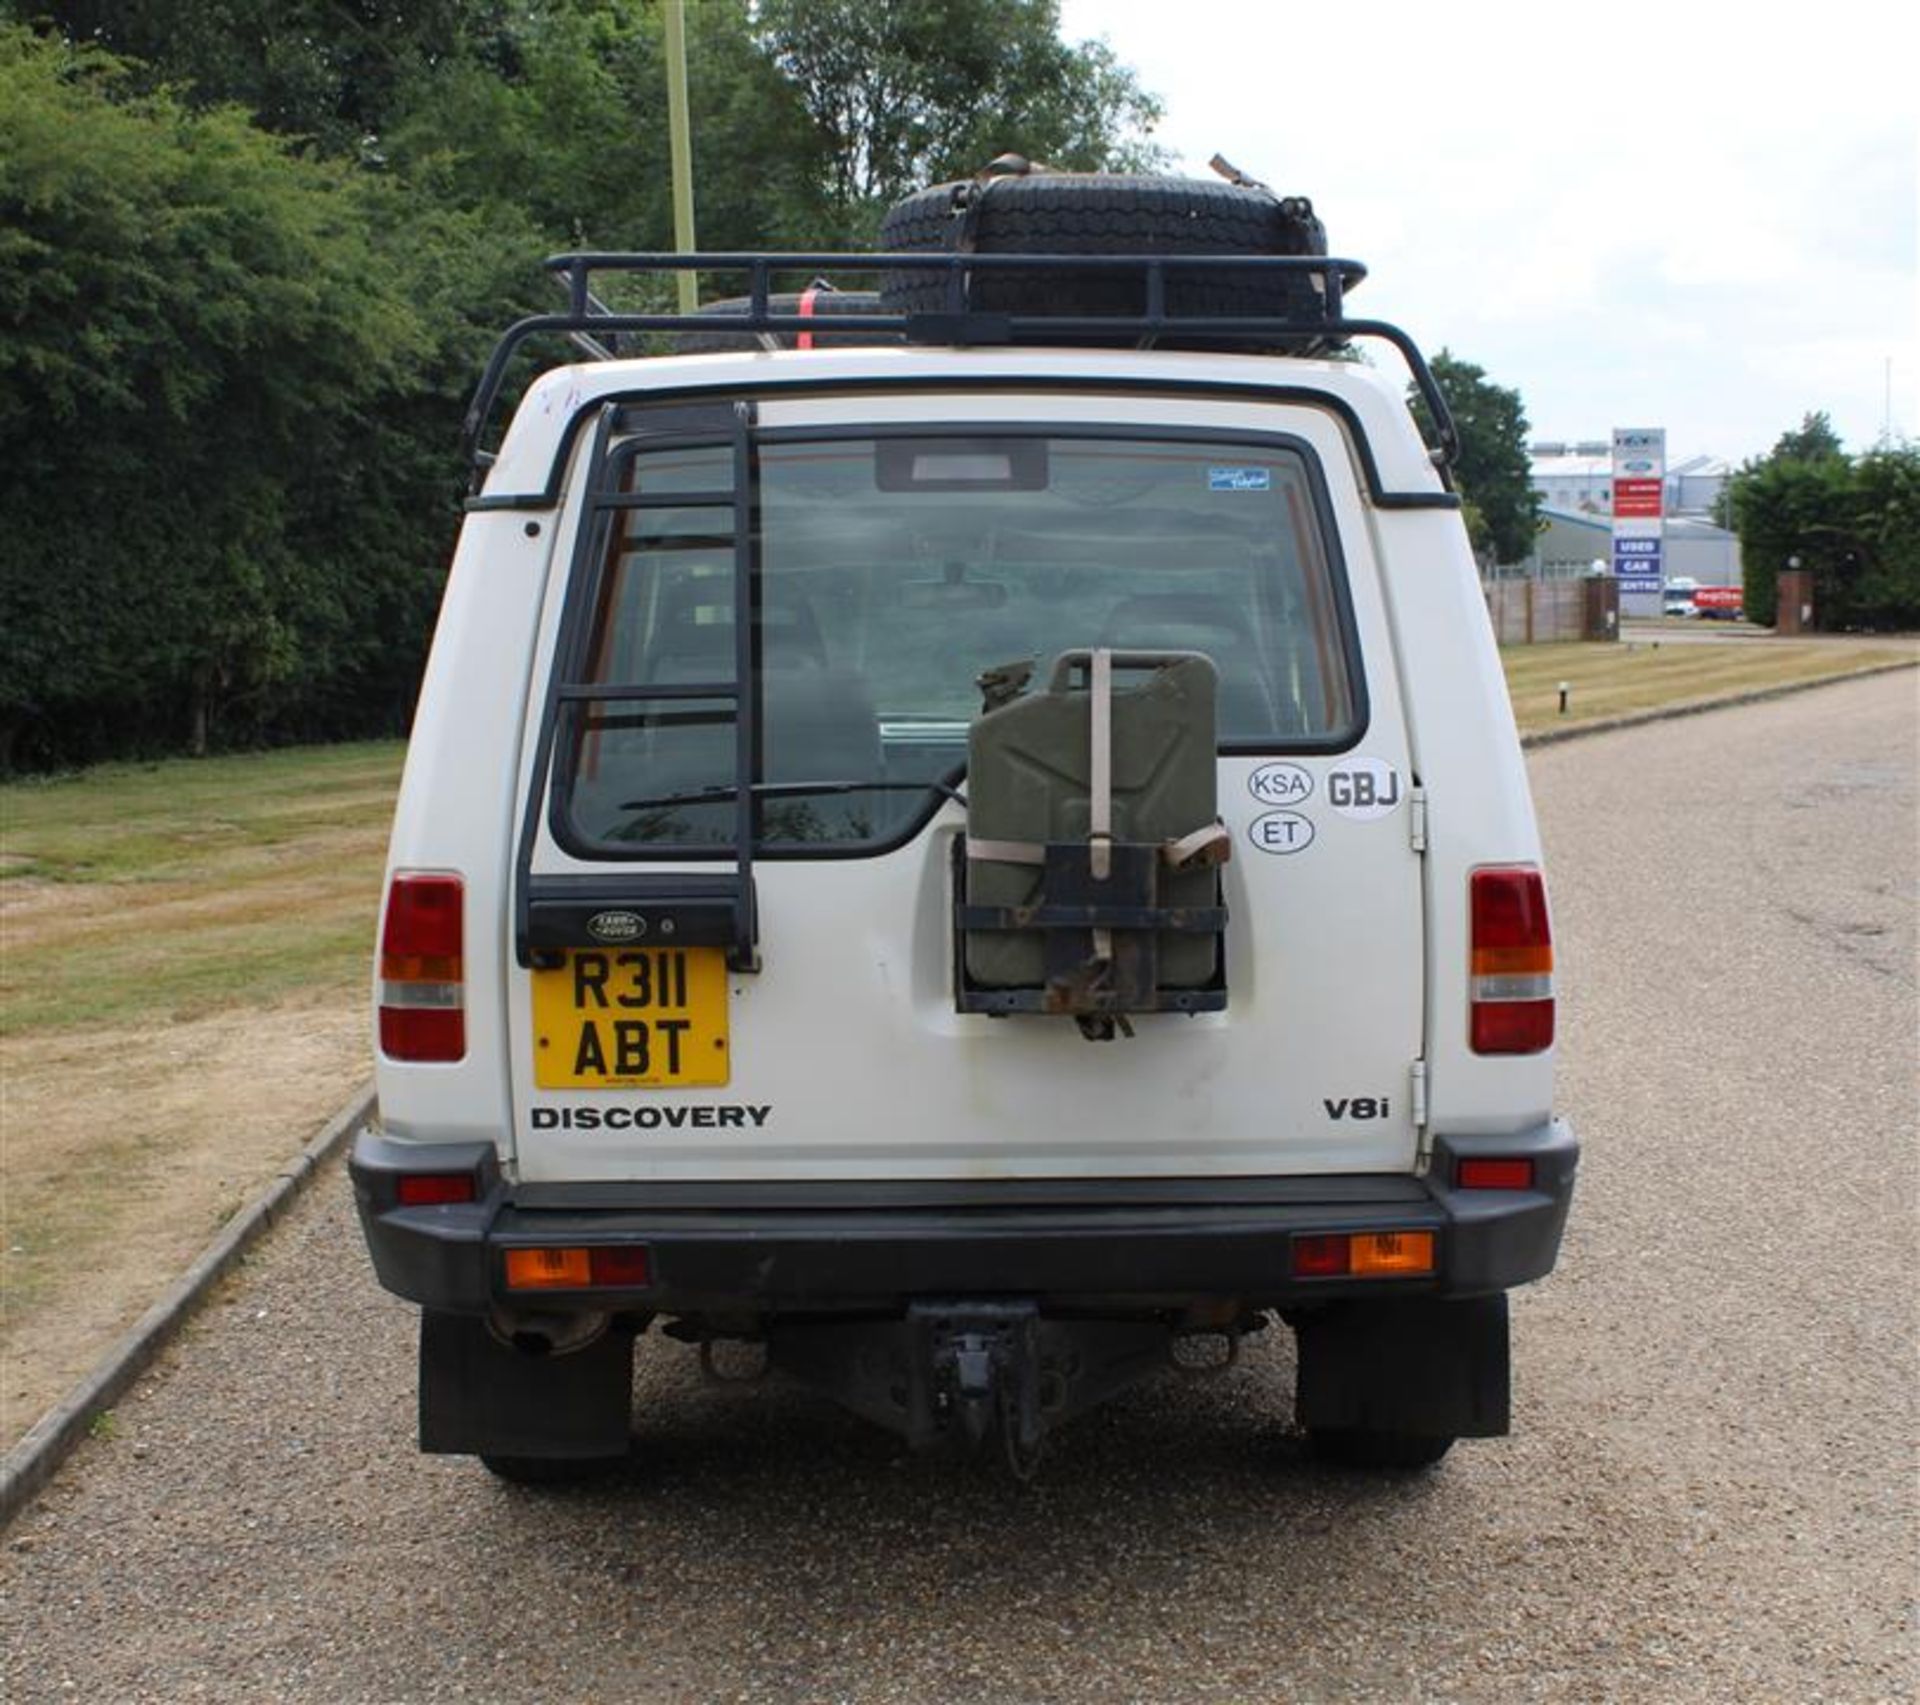 1998 Land Rover DiscoverySeries I 3.9 V8i LHD - Image 4 of 24